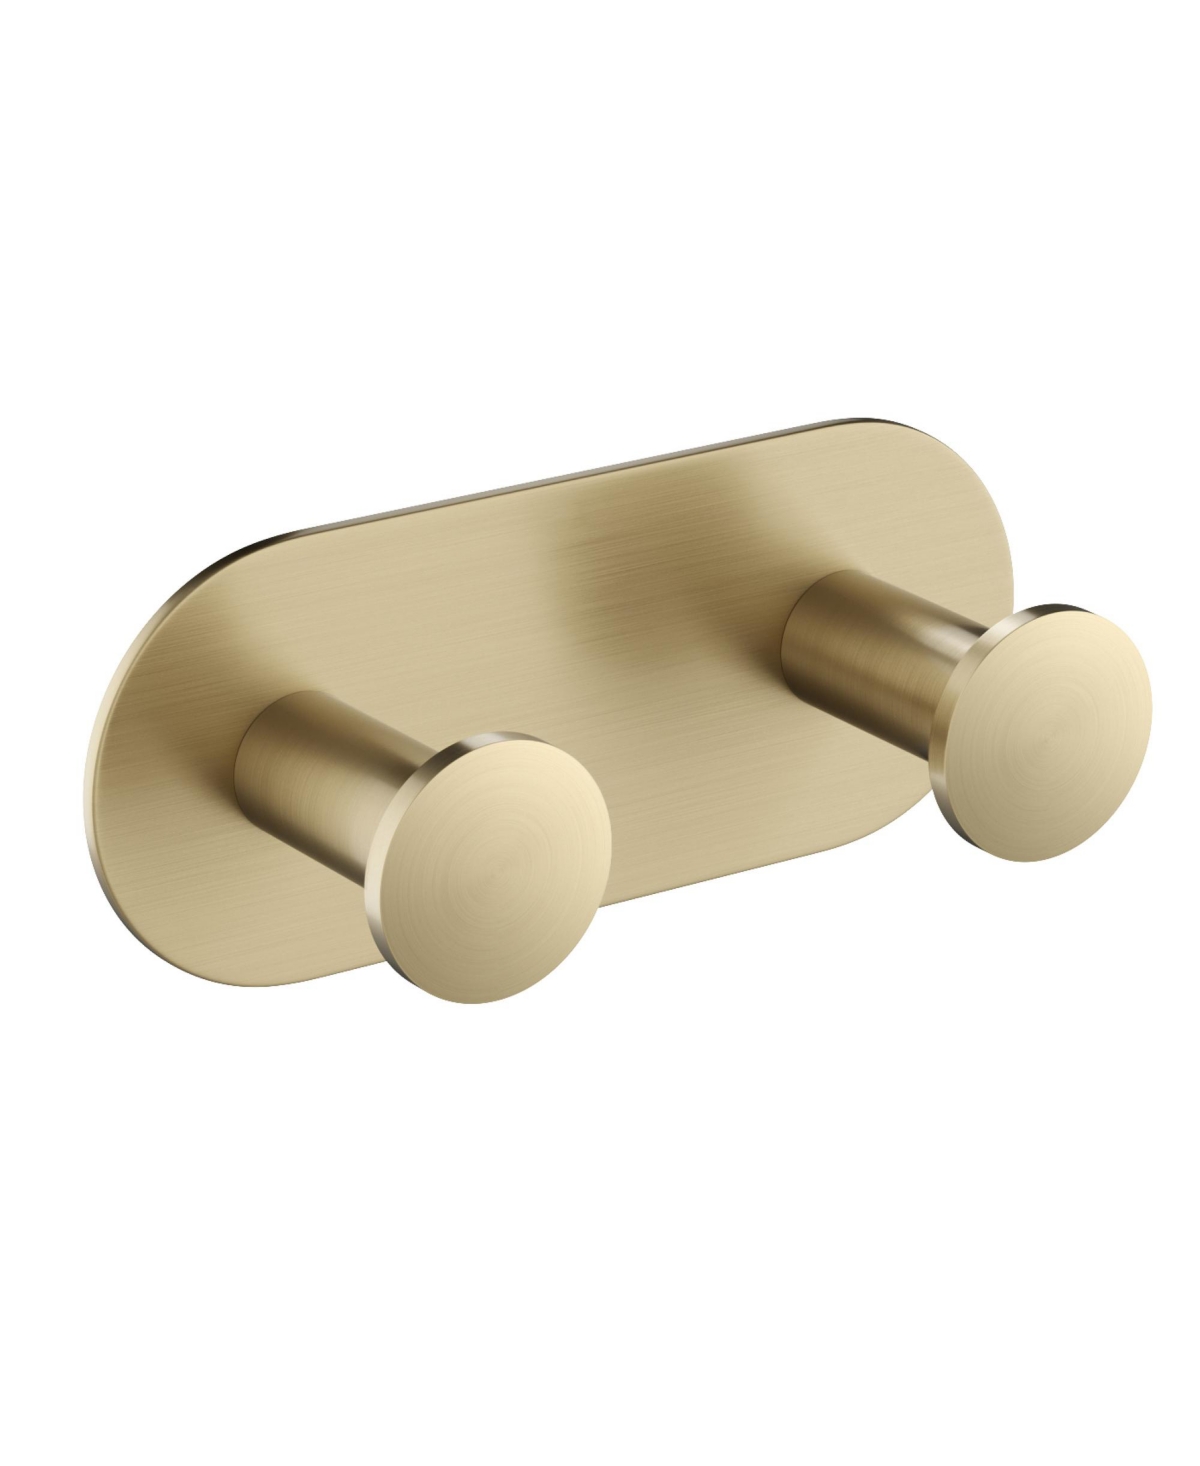 Elie Bathroom Robe and Towel Rack with 2 Hooks - Brushed gold